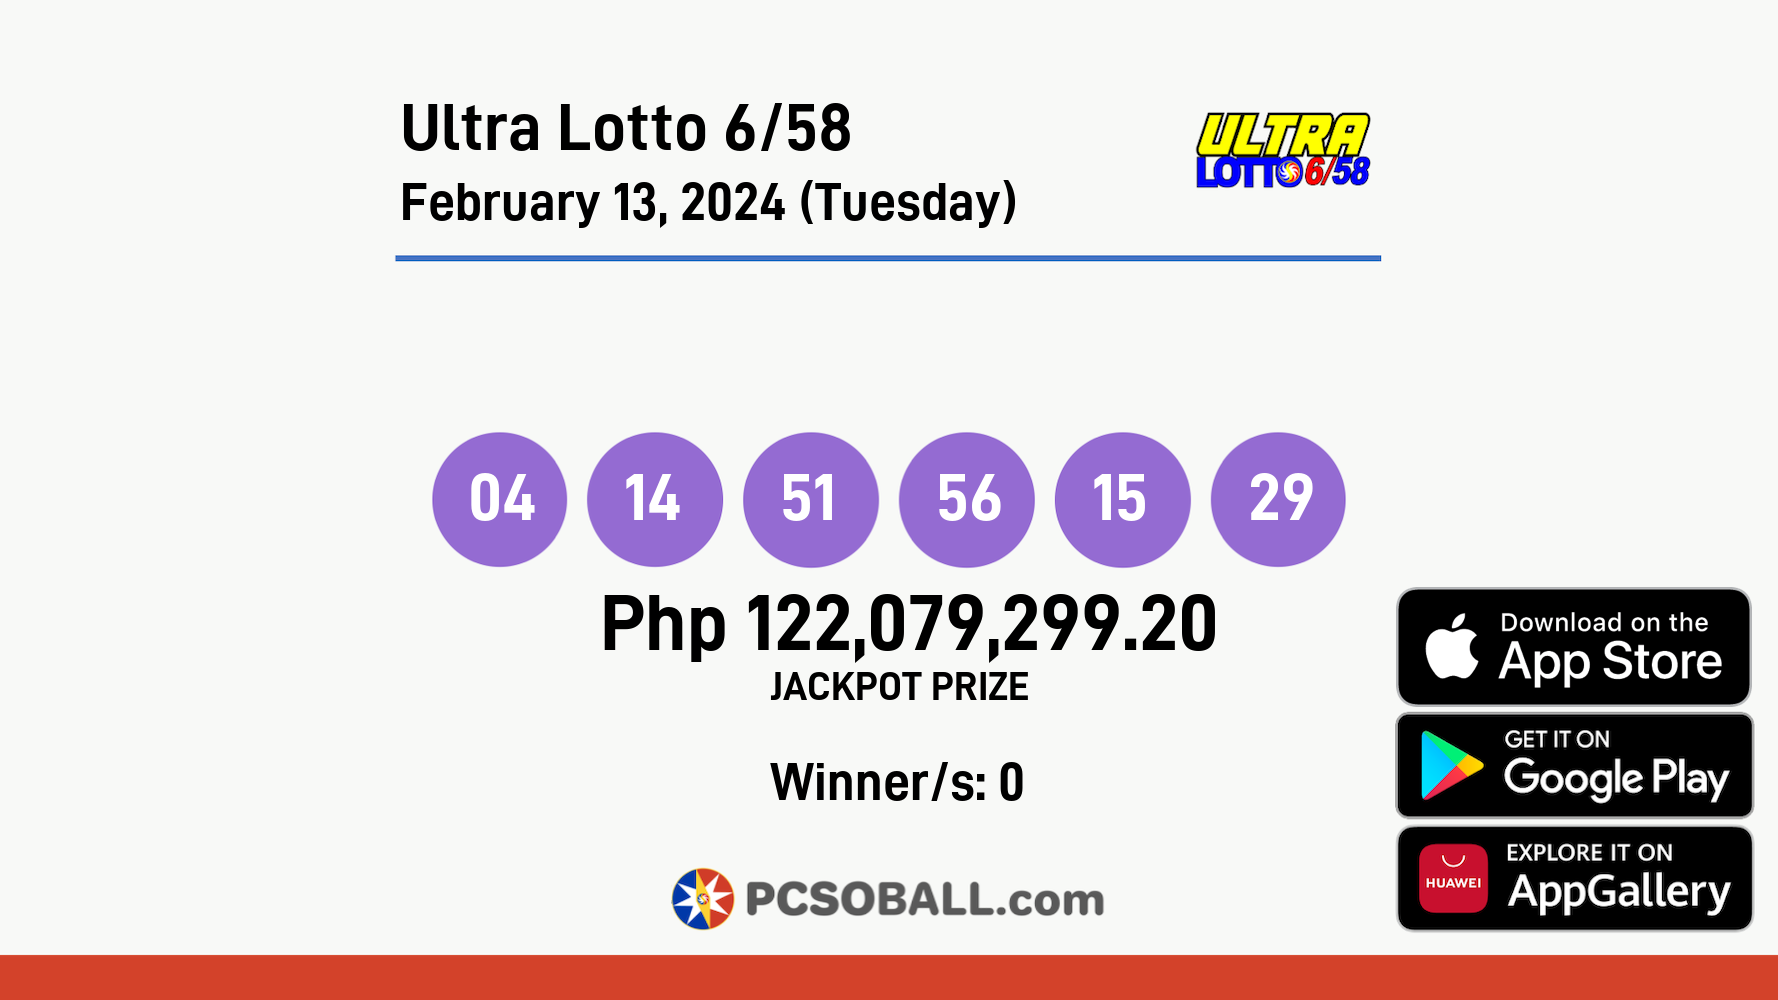 Ultra Lotto 6/58 February 13, 2024 (Tuesday) Result